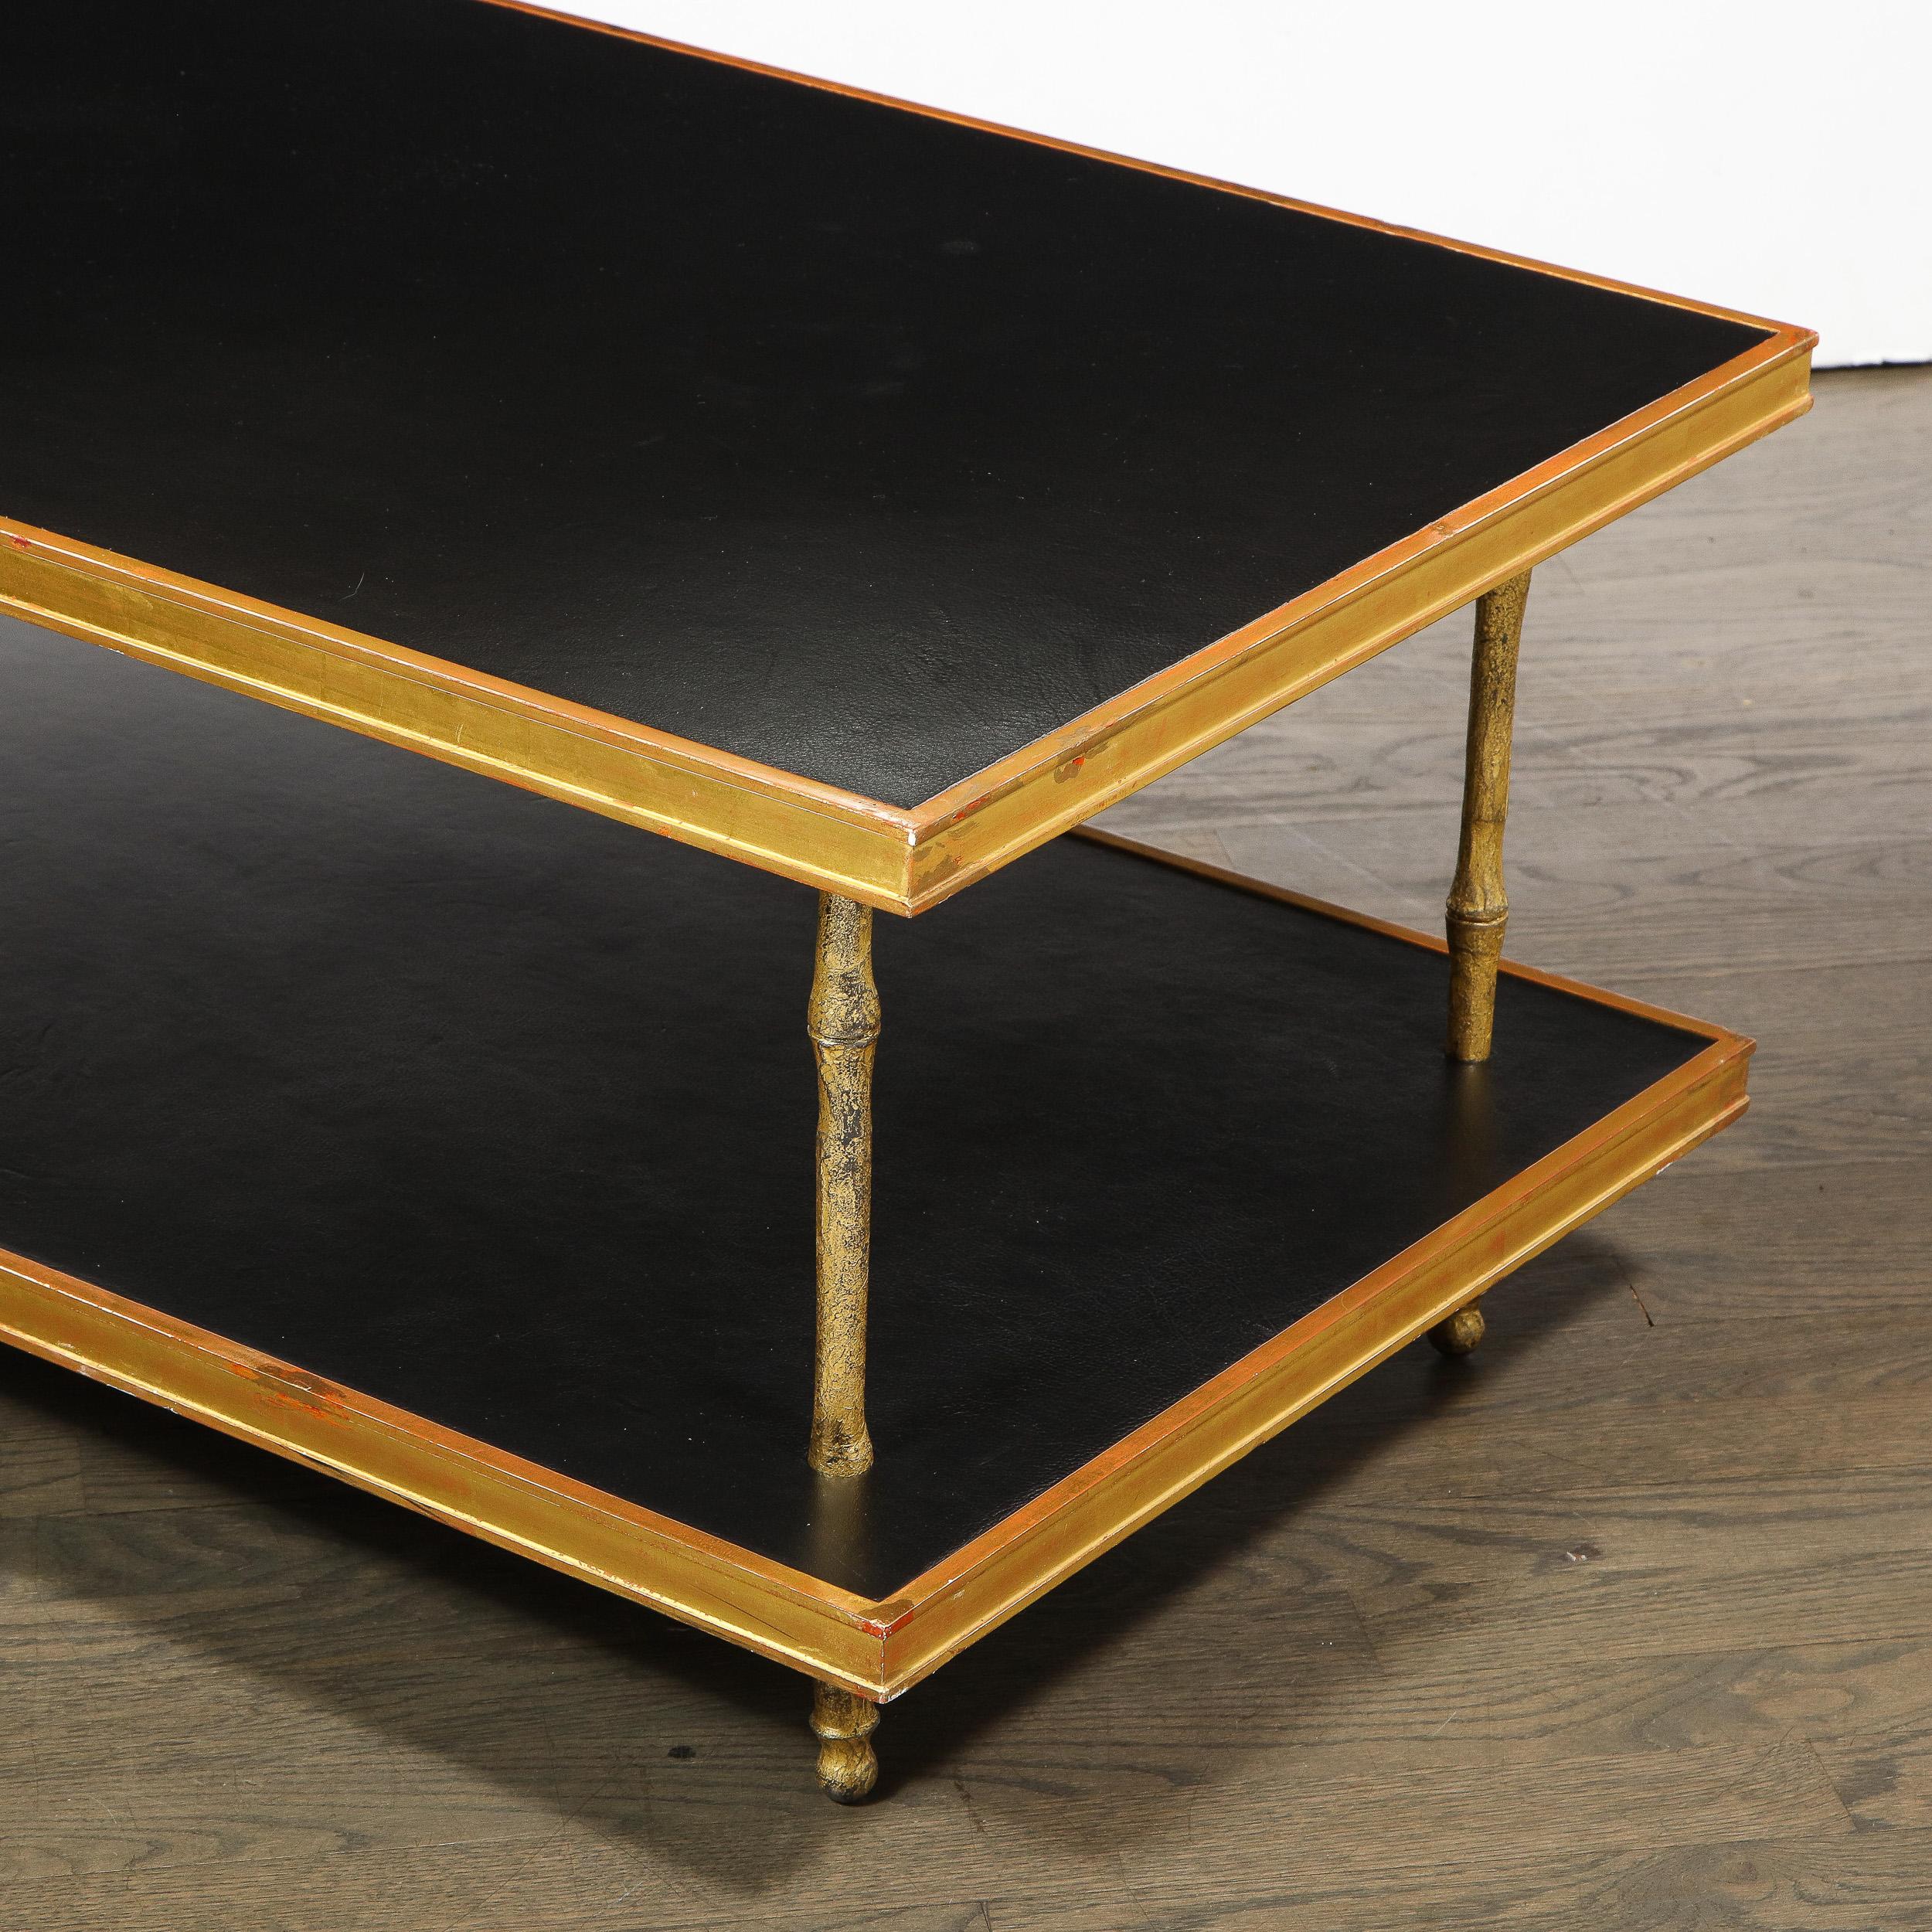 Modernist Black Leather and Giltwood Two-Tier Cocktail Table by Carole Gratale 1